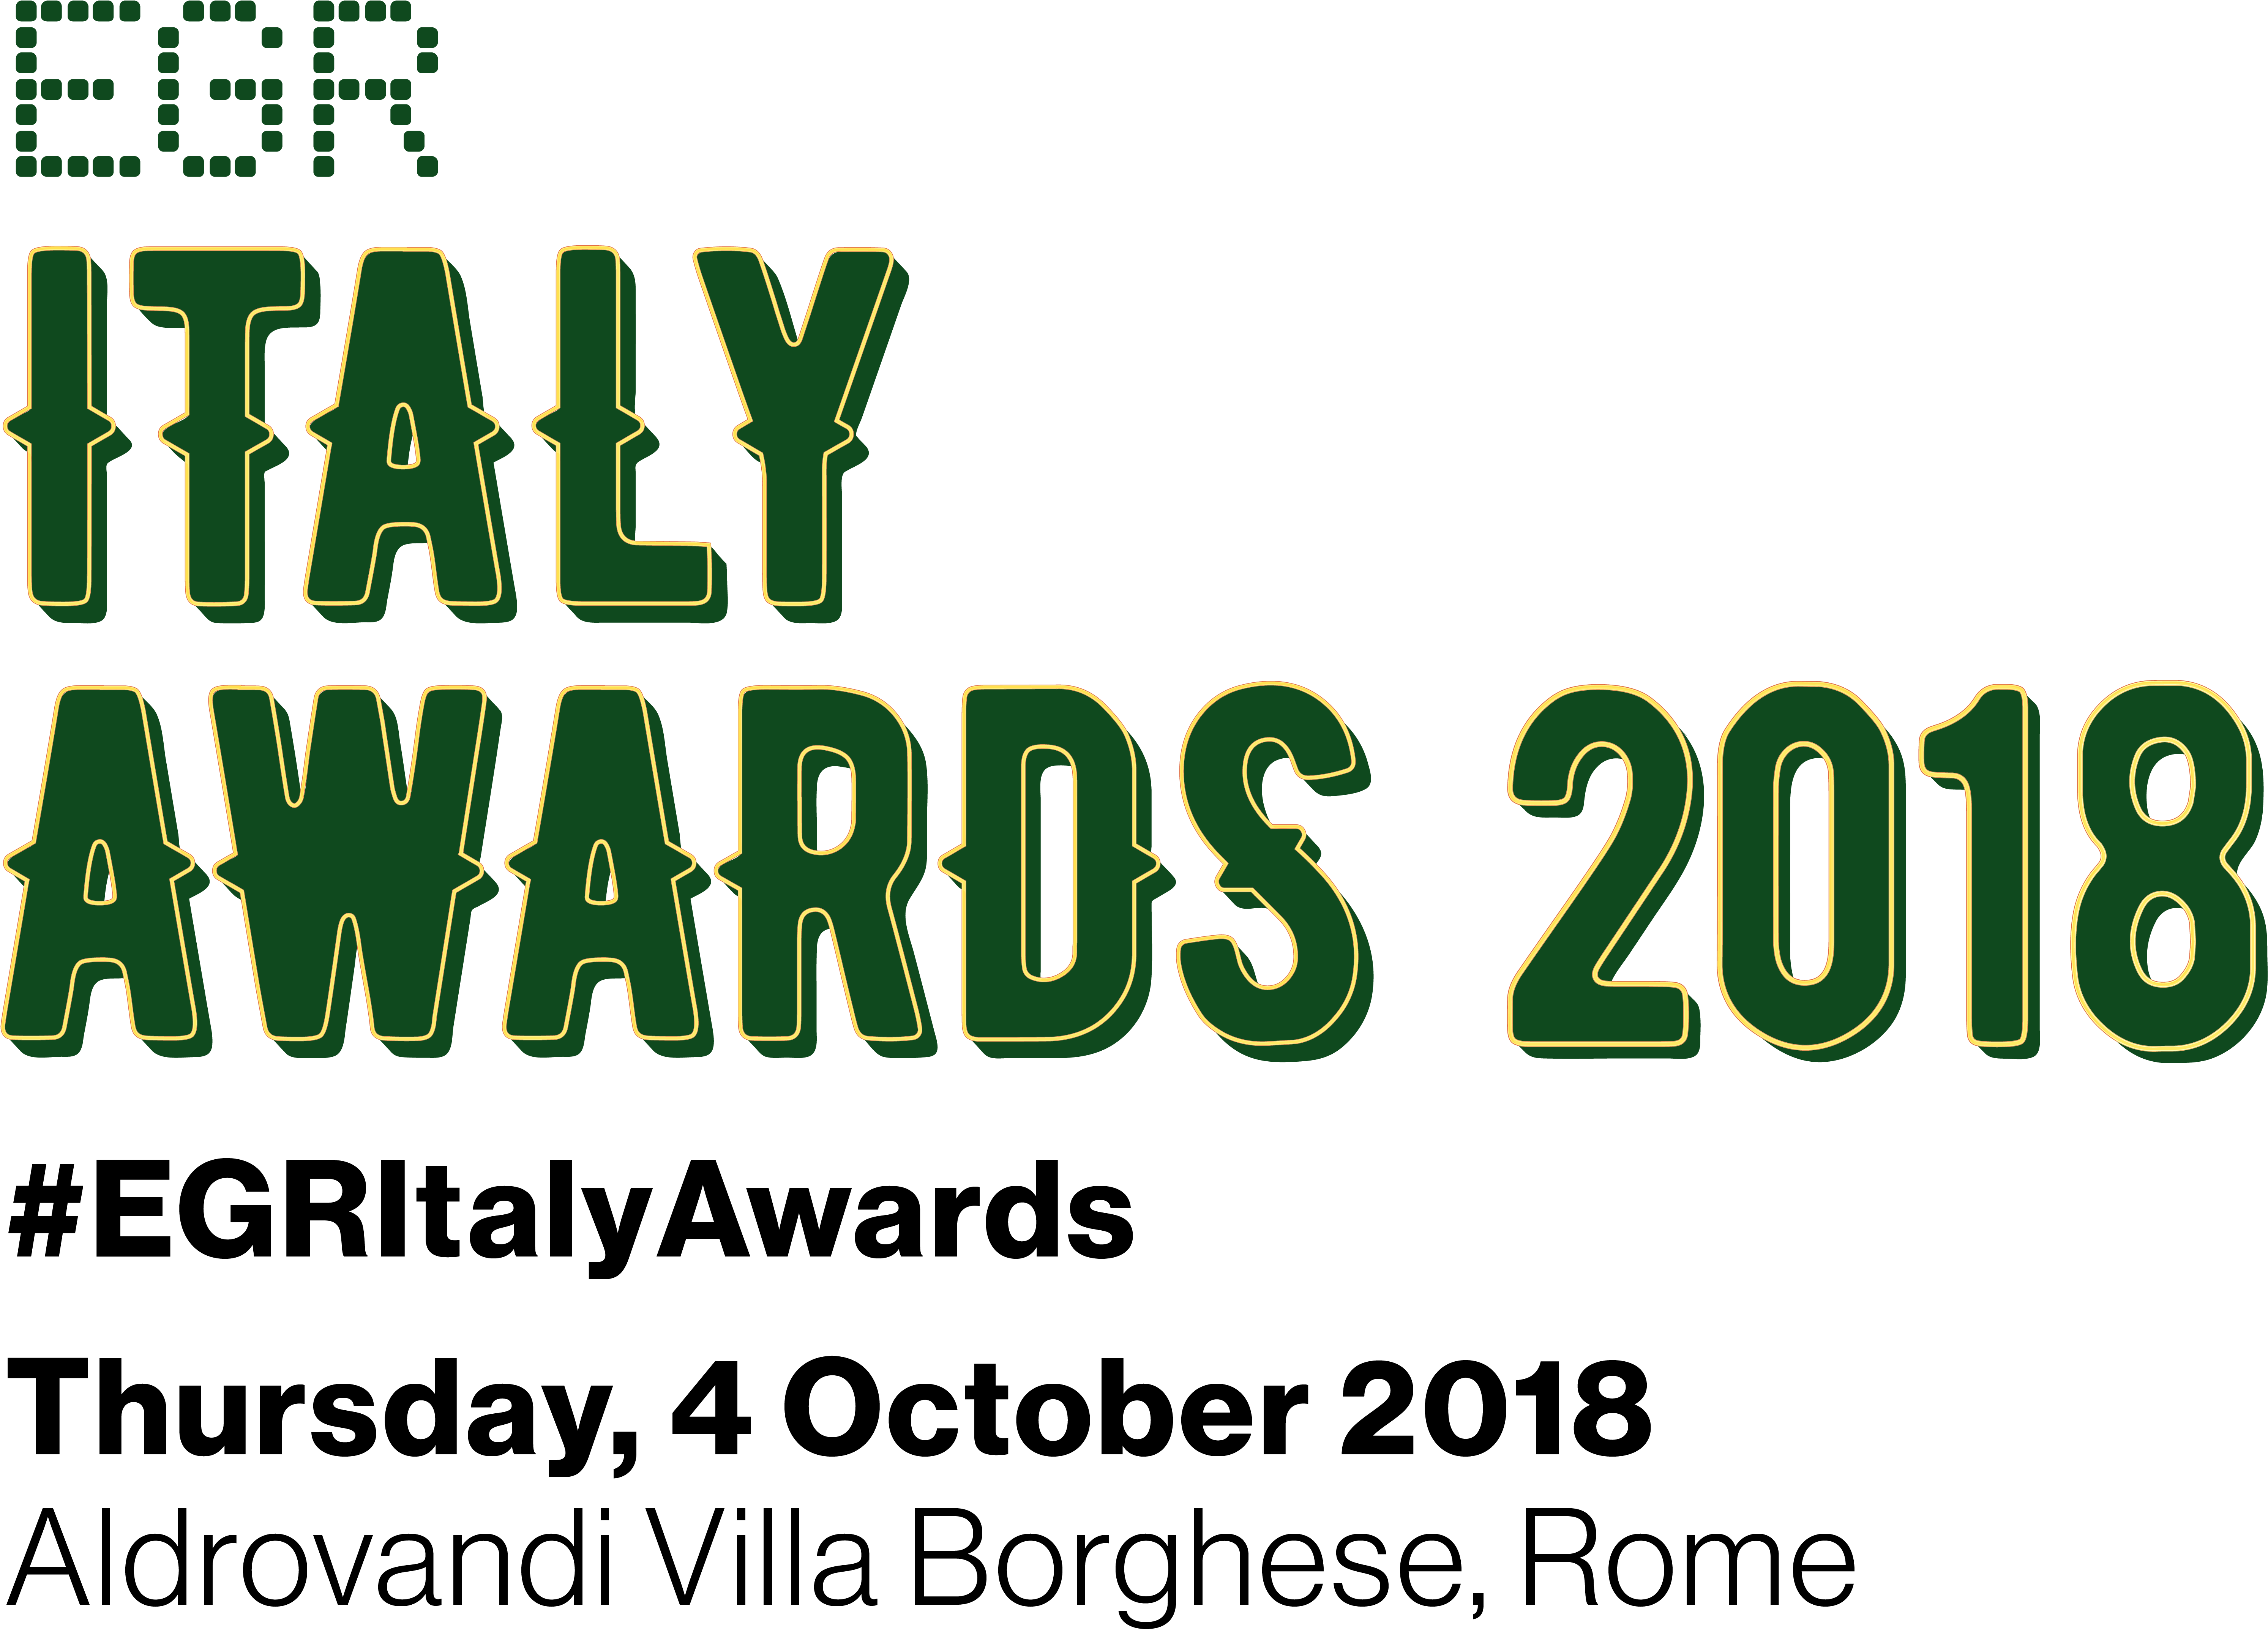 Egr Italy Awards - Egr Italy Awards 2018 (6668x5001), Png Download